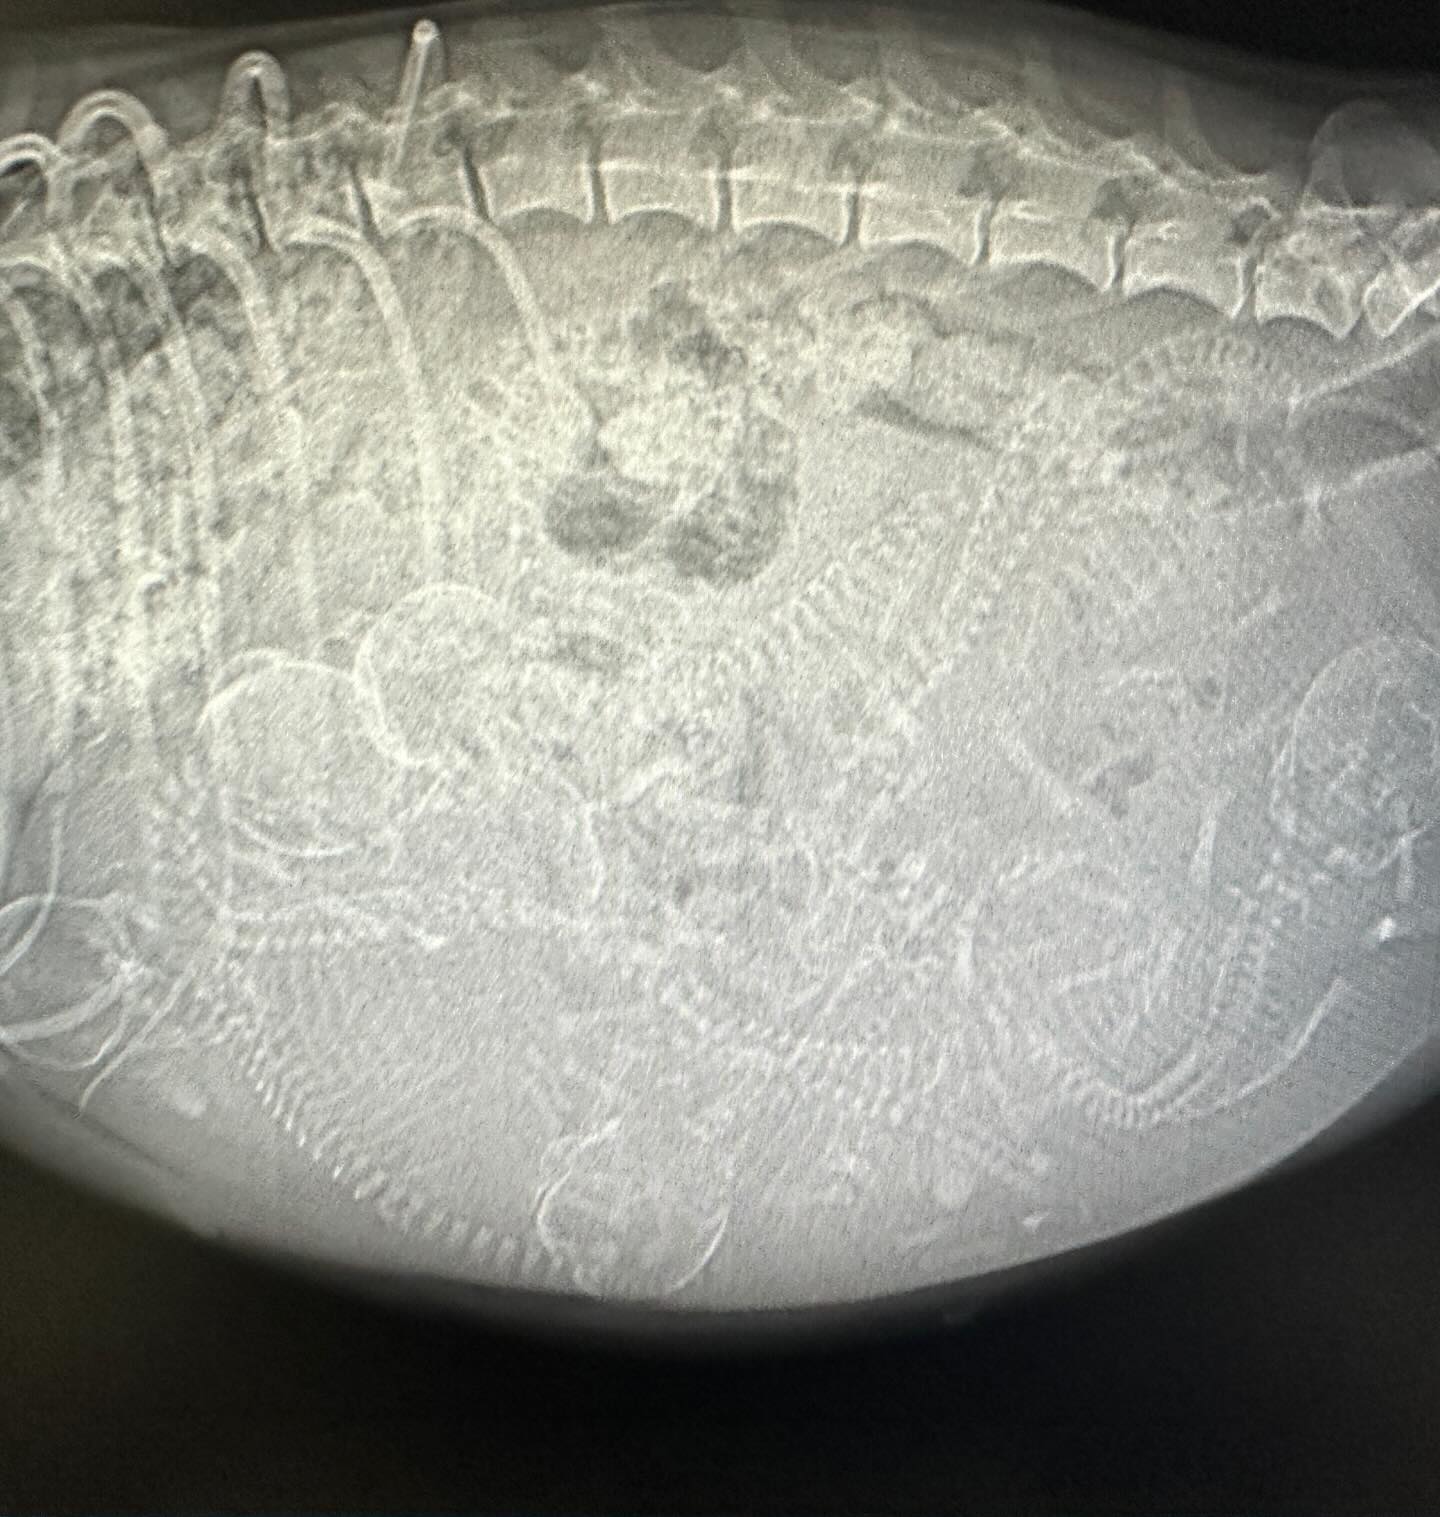 x-ray of dog